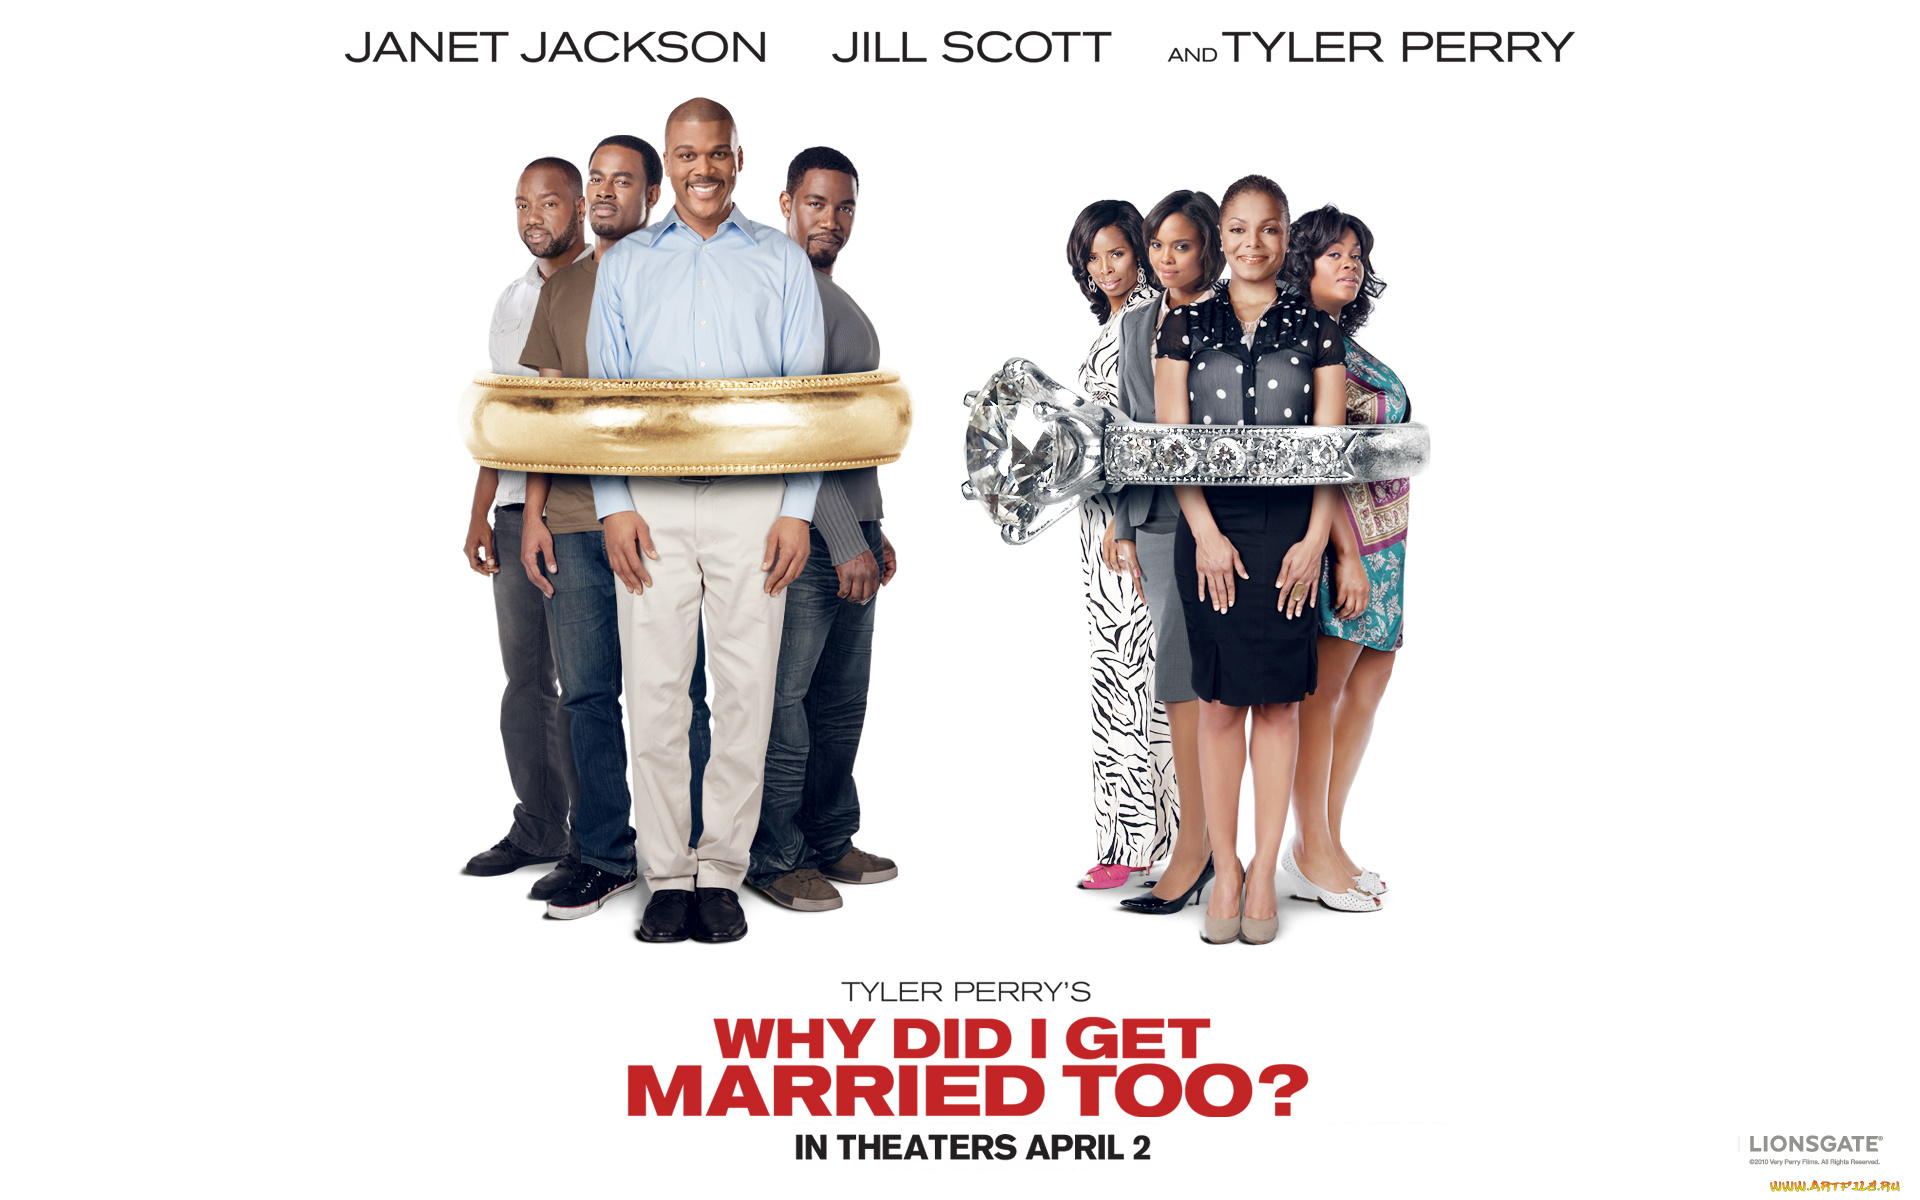 tyler, perry`s, why, did, get, married, too, кино, фильмы